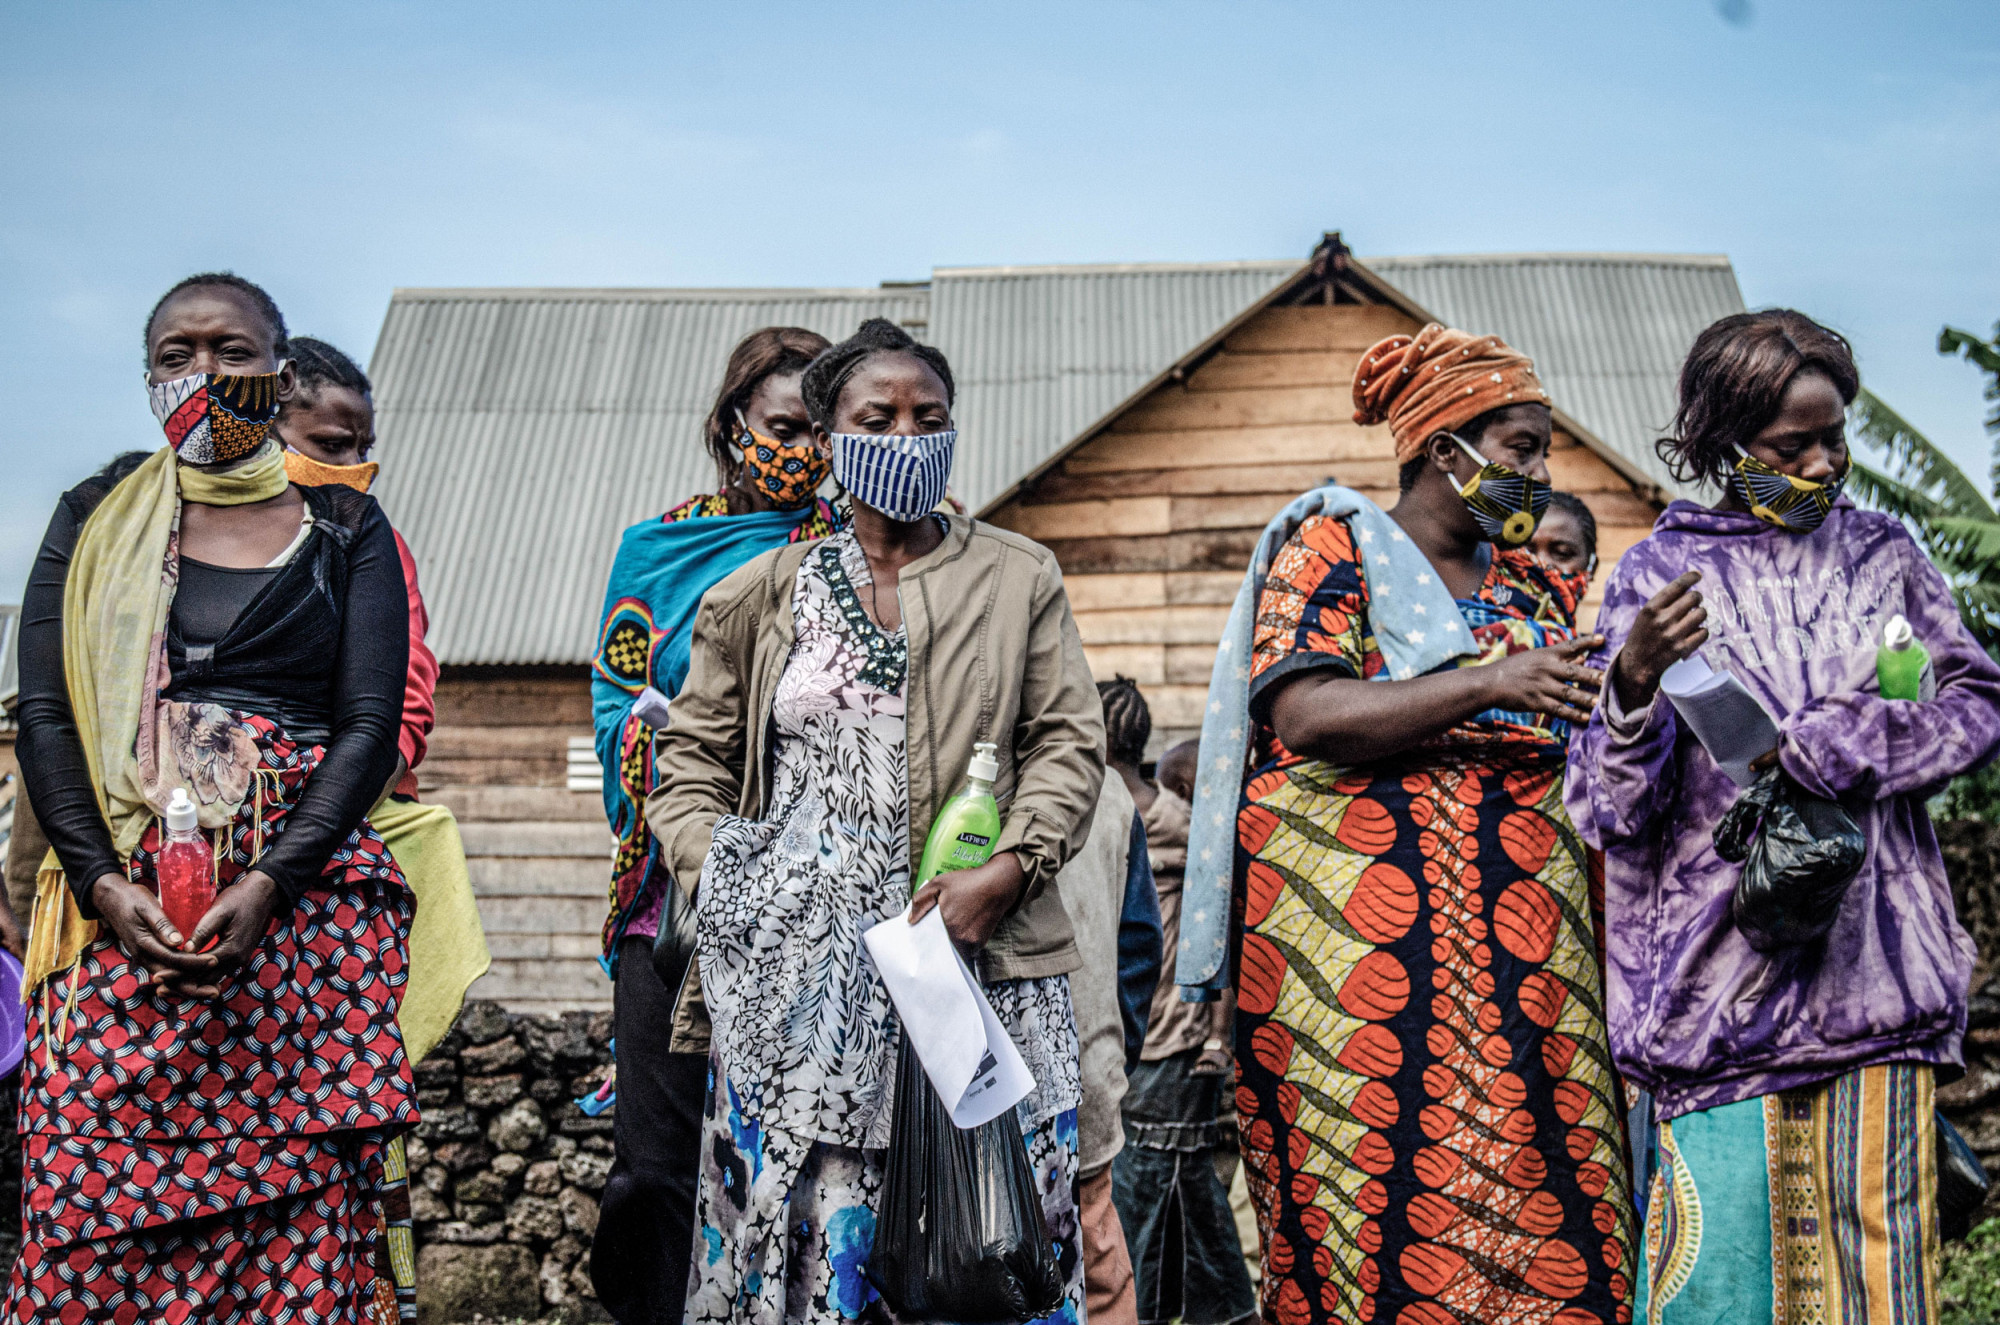 Goma, DRC, May 2020. Residents of the Mugunga neighborhood attend a coronavirus information session provided by the Bahati Foundation, during which masks and hand-washing materials were also provided to attendees. © Arlette Bashizi for Fondation Carmignac